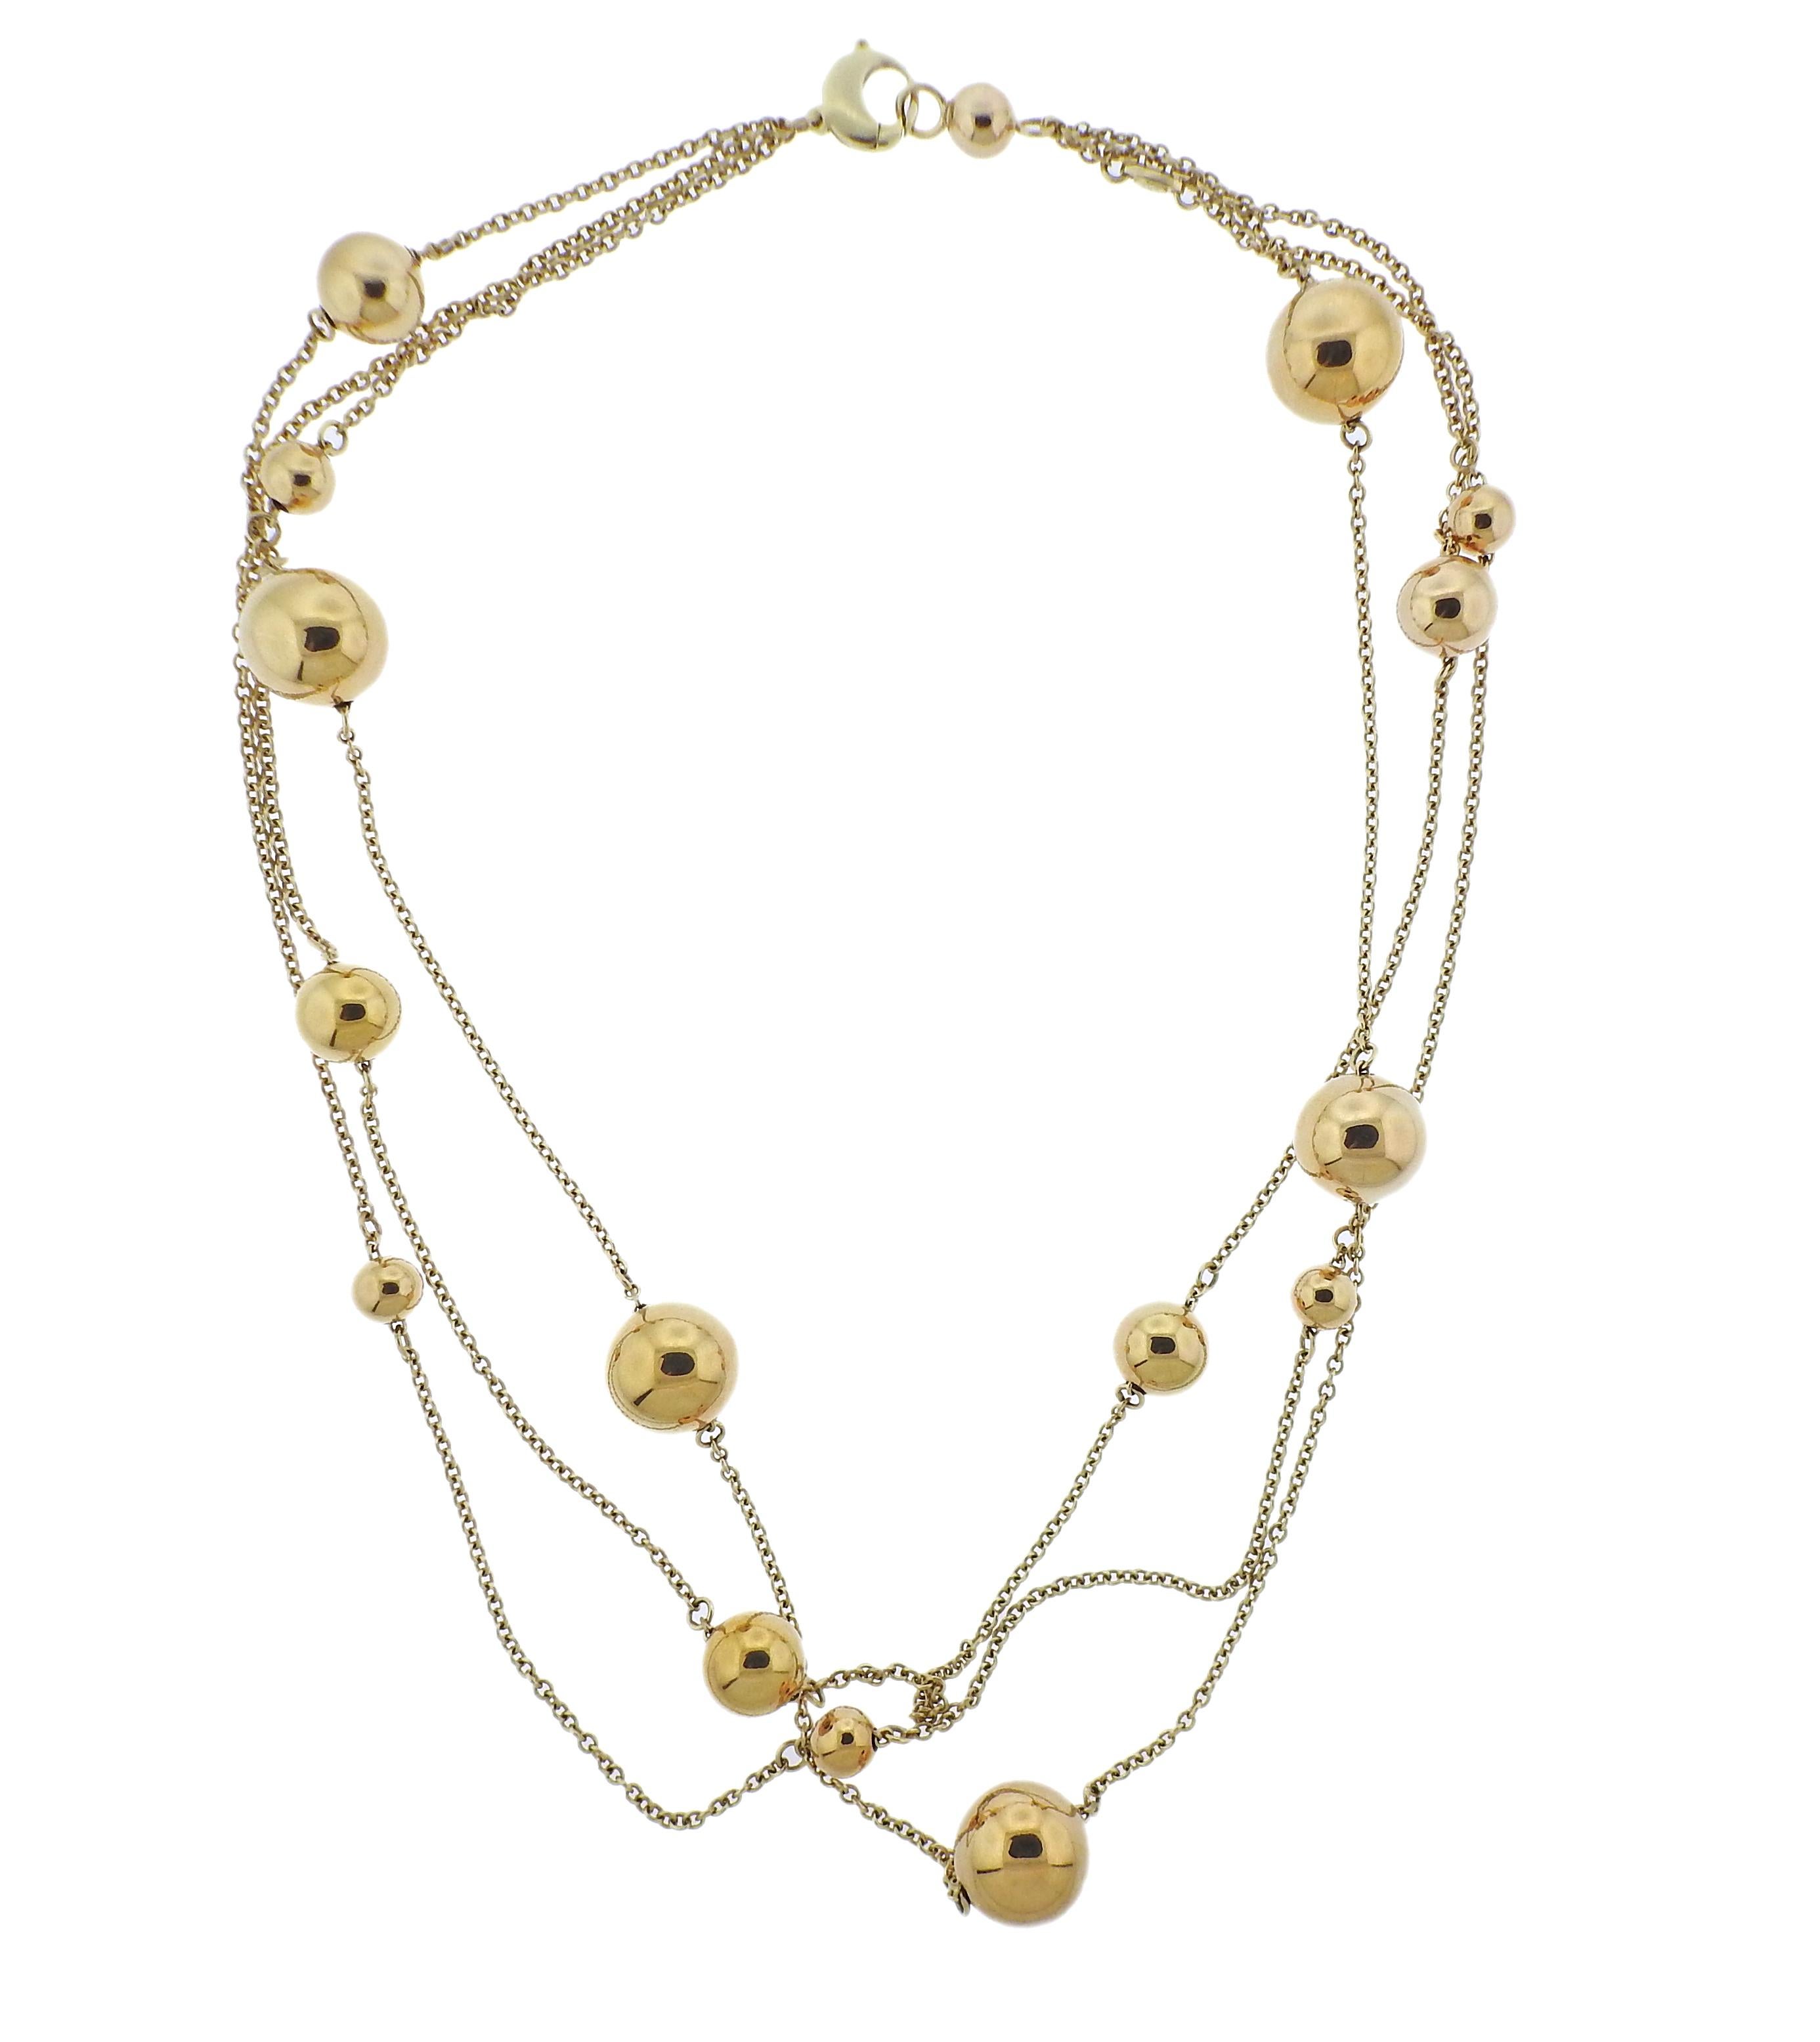 18k yellow gold Pallini ball station necklace by Roberto Coin. Necklace features 3 strands, with multi size balls. Necklace's wearable length is 22.5